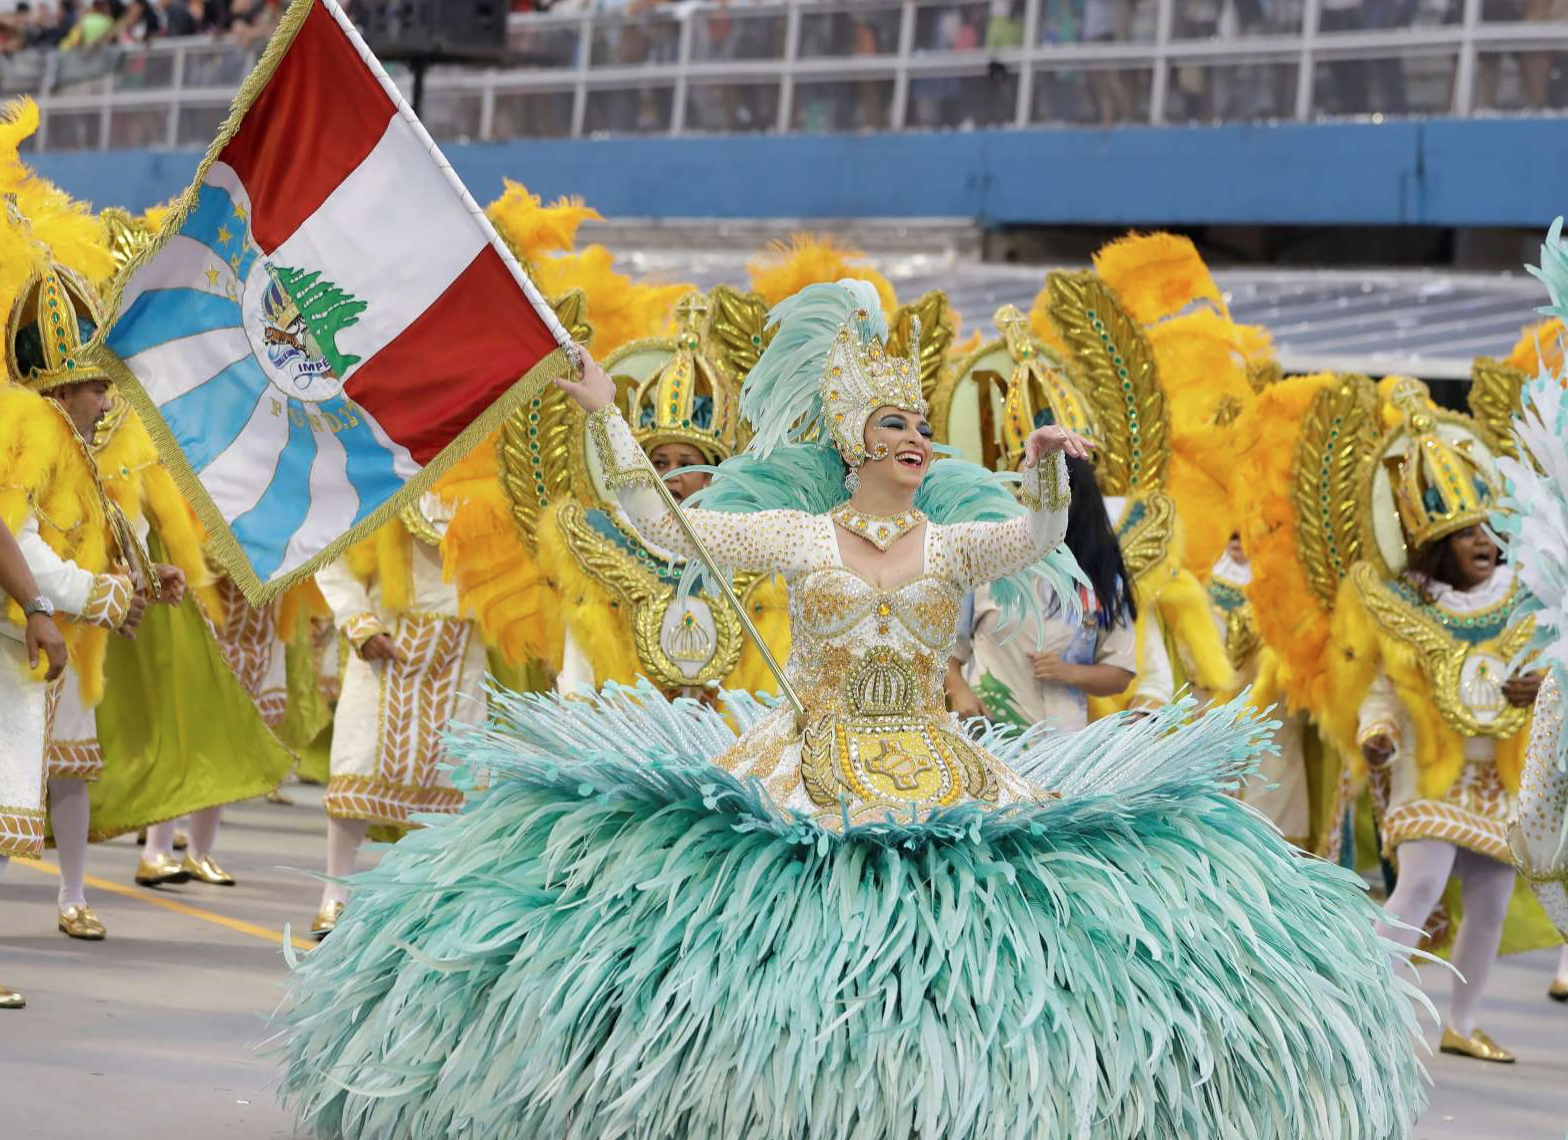 Carnival begins in Rio, but tourists will face contaminated water